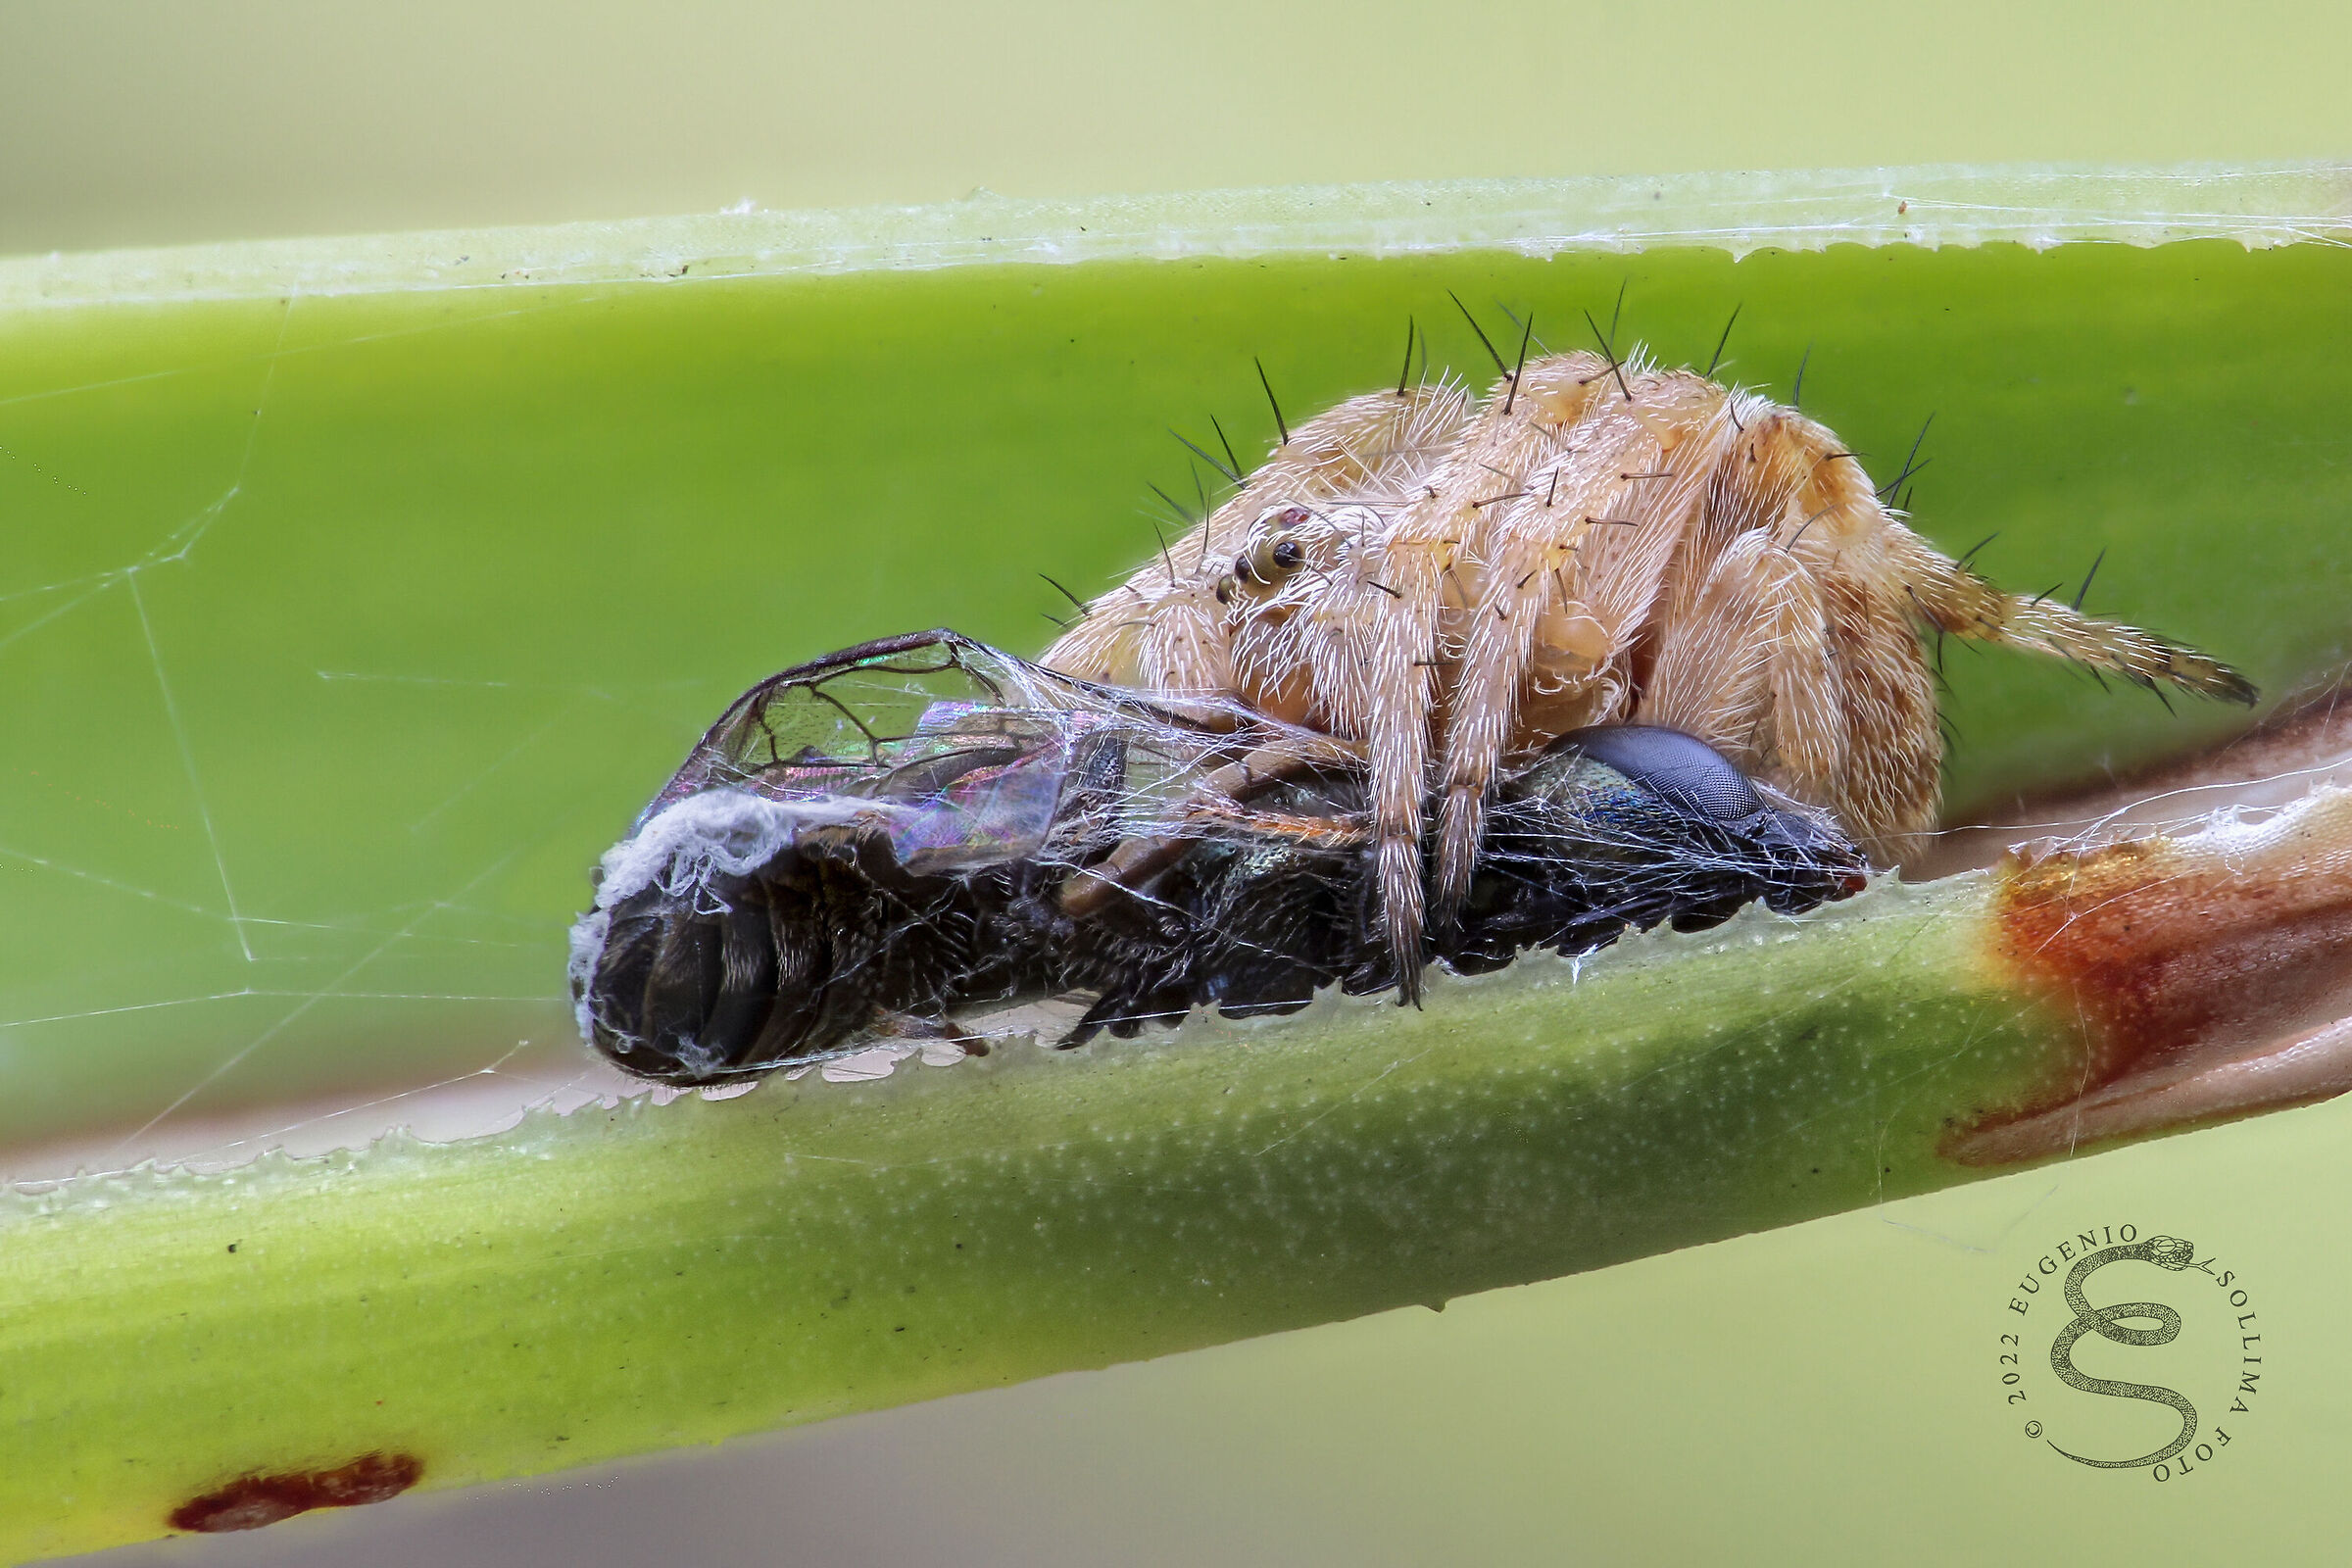 Spider preying on a hymenoptera...